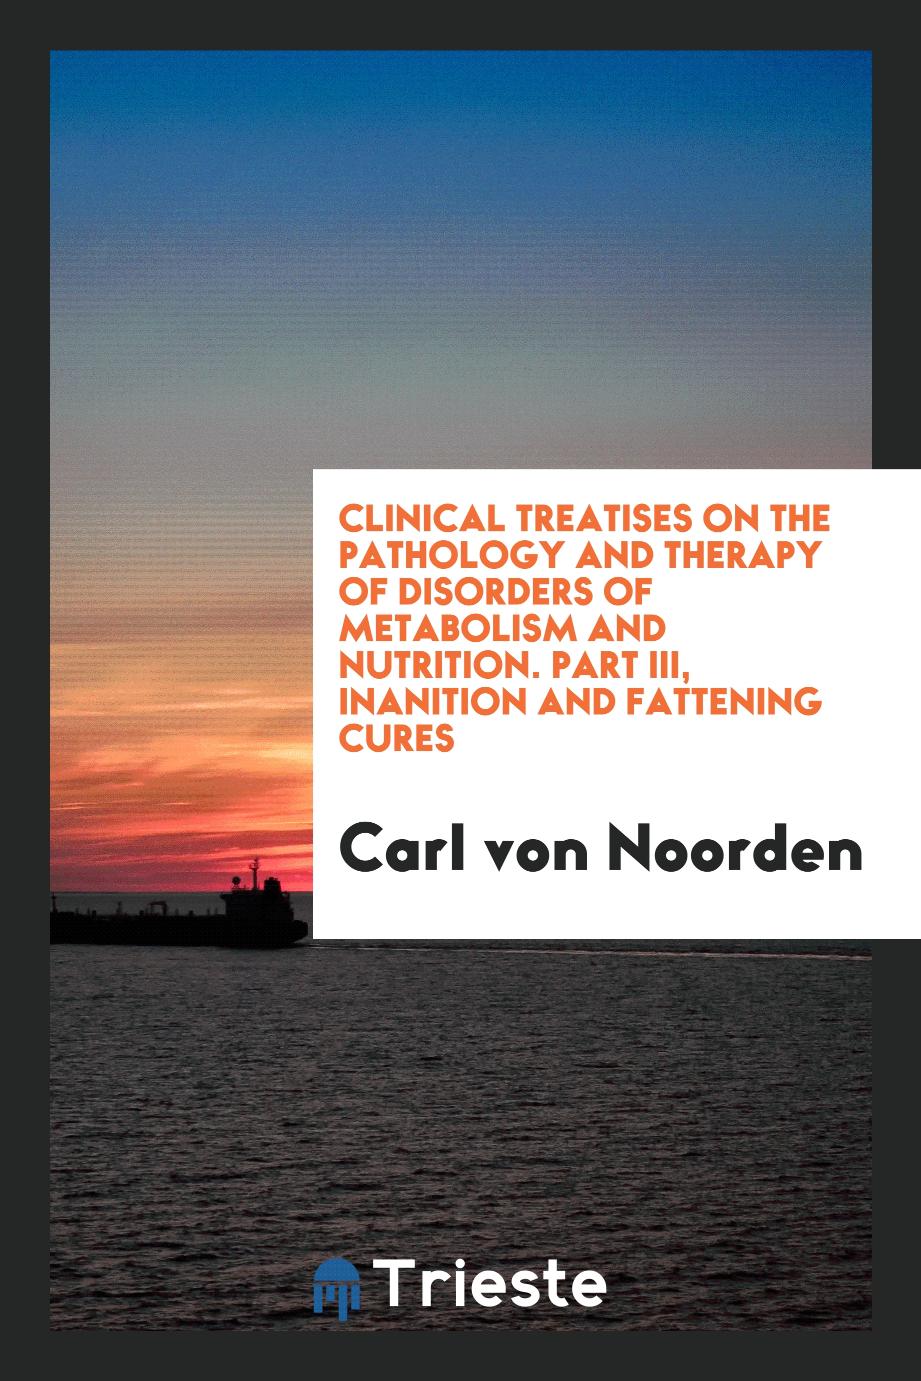 Clinical Treatises on the Pathology and Therapy of Disorders of Metabolism and Nutrition. Part III, Inanition and Fattening Cures